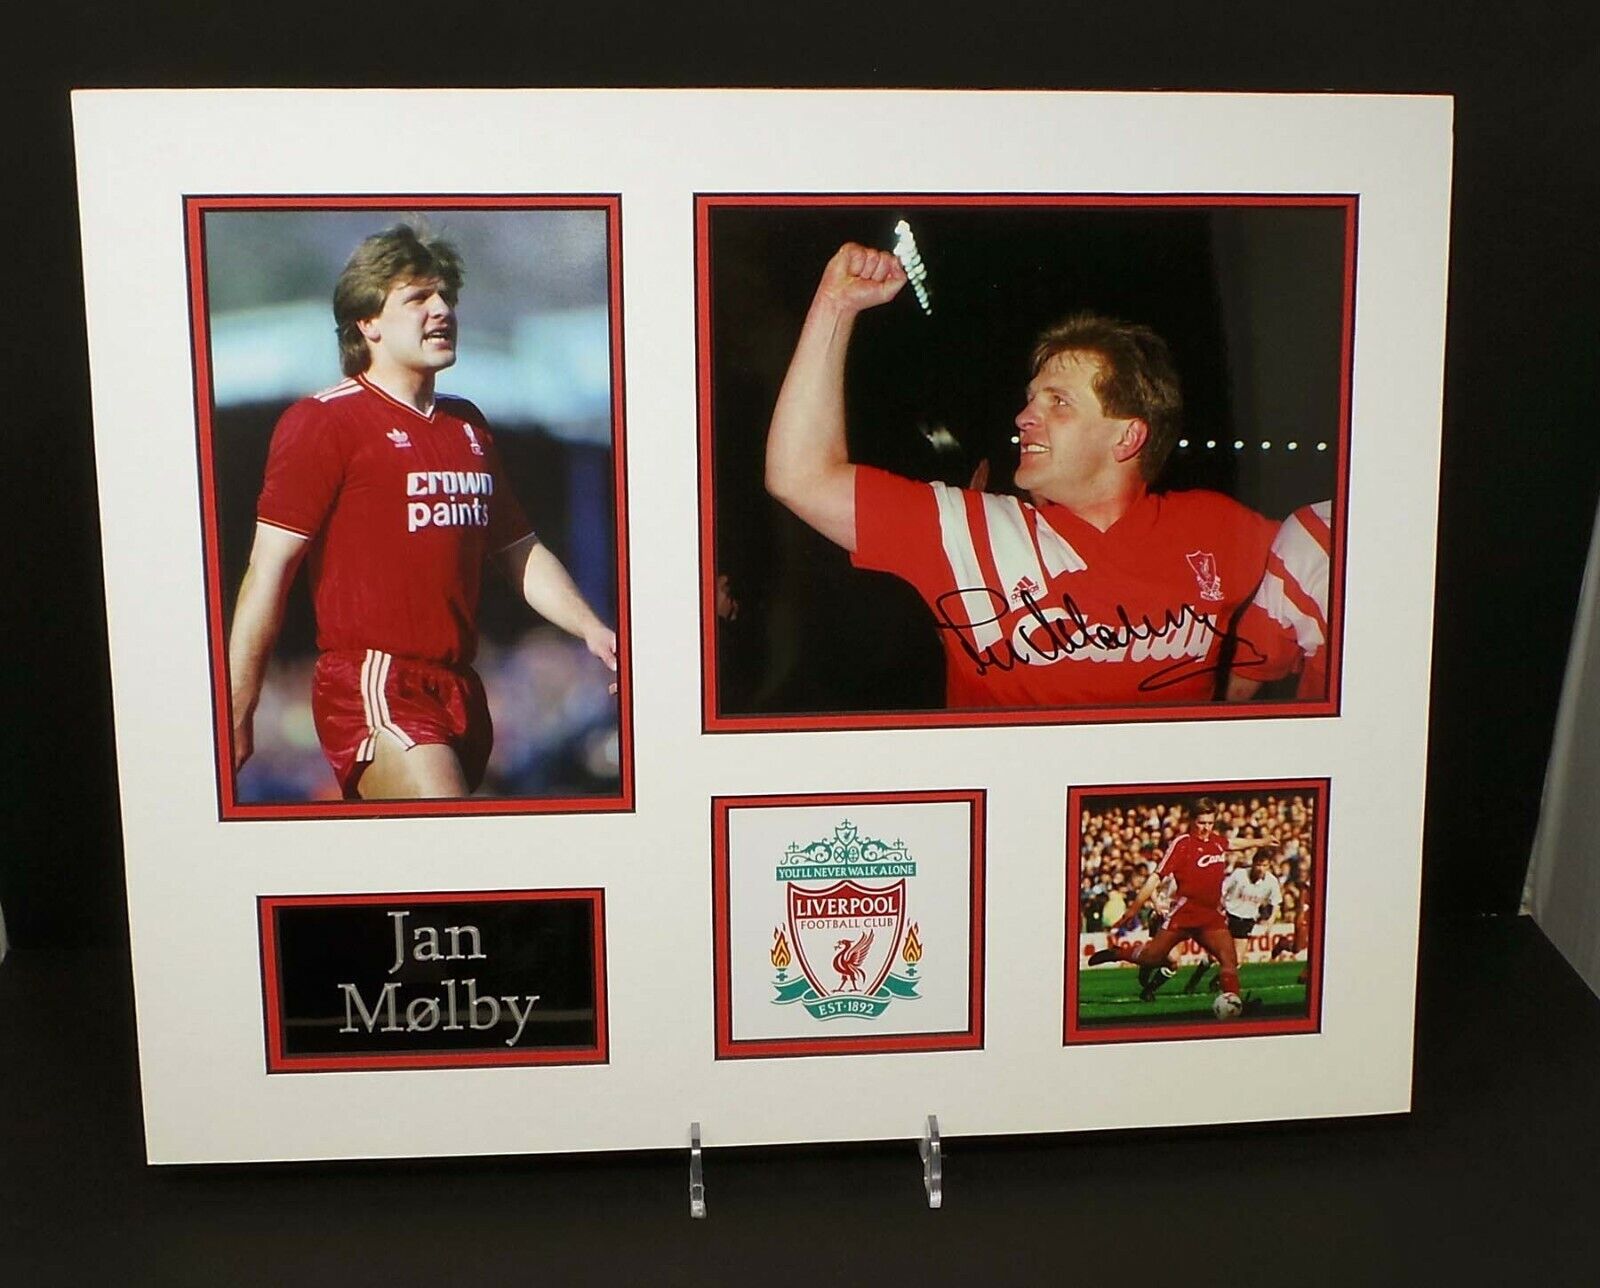 Jan MOLBY Signed & Mounted Liverpool Cop Legend Photo Poster painting 20x16 Display AFTAL RD COA